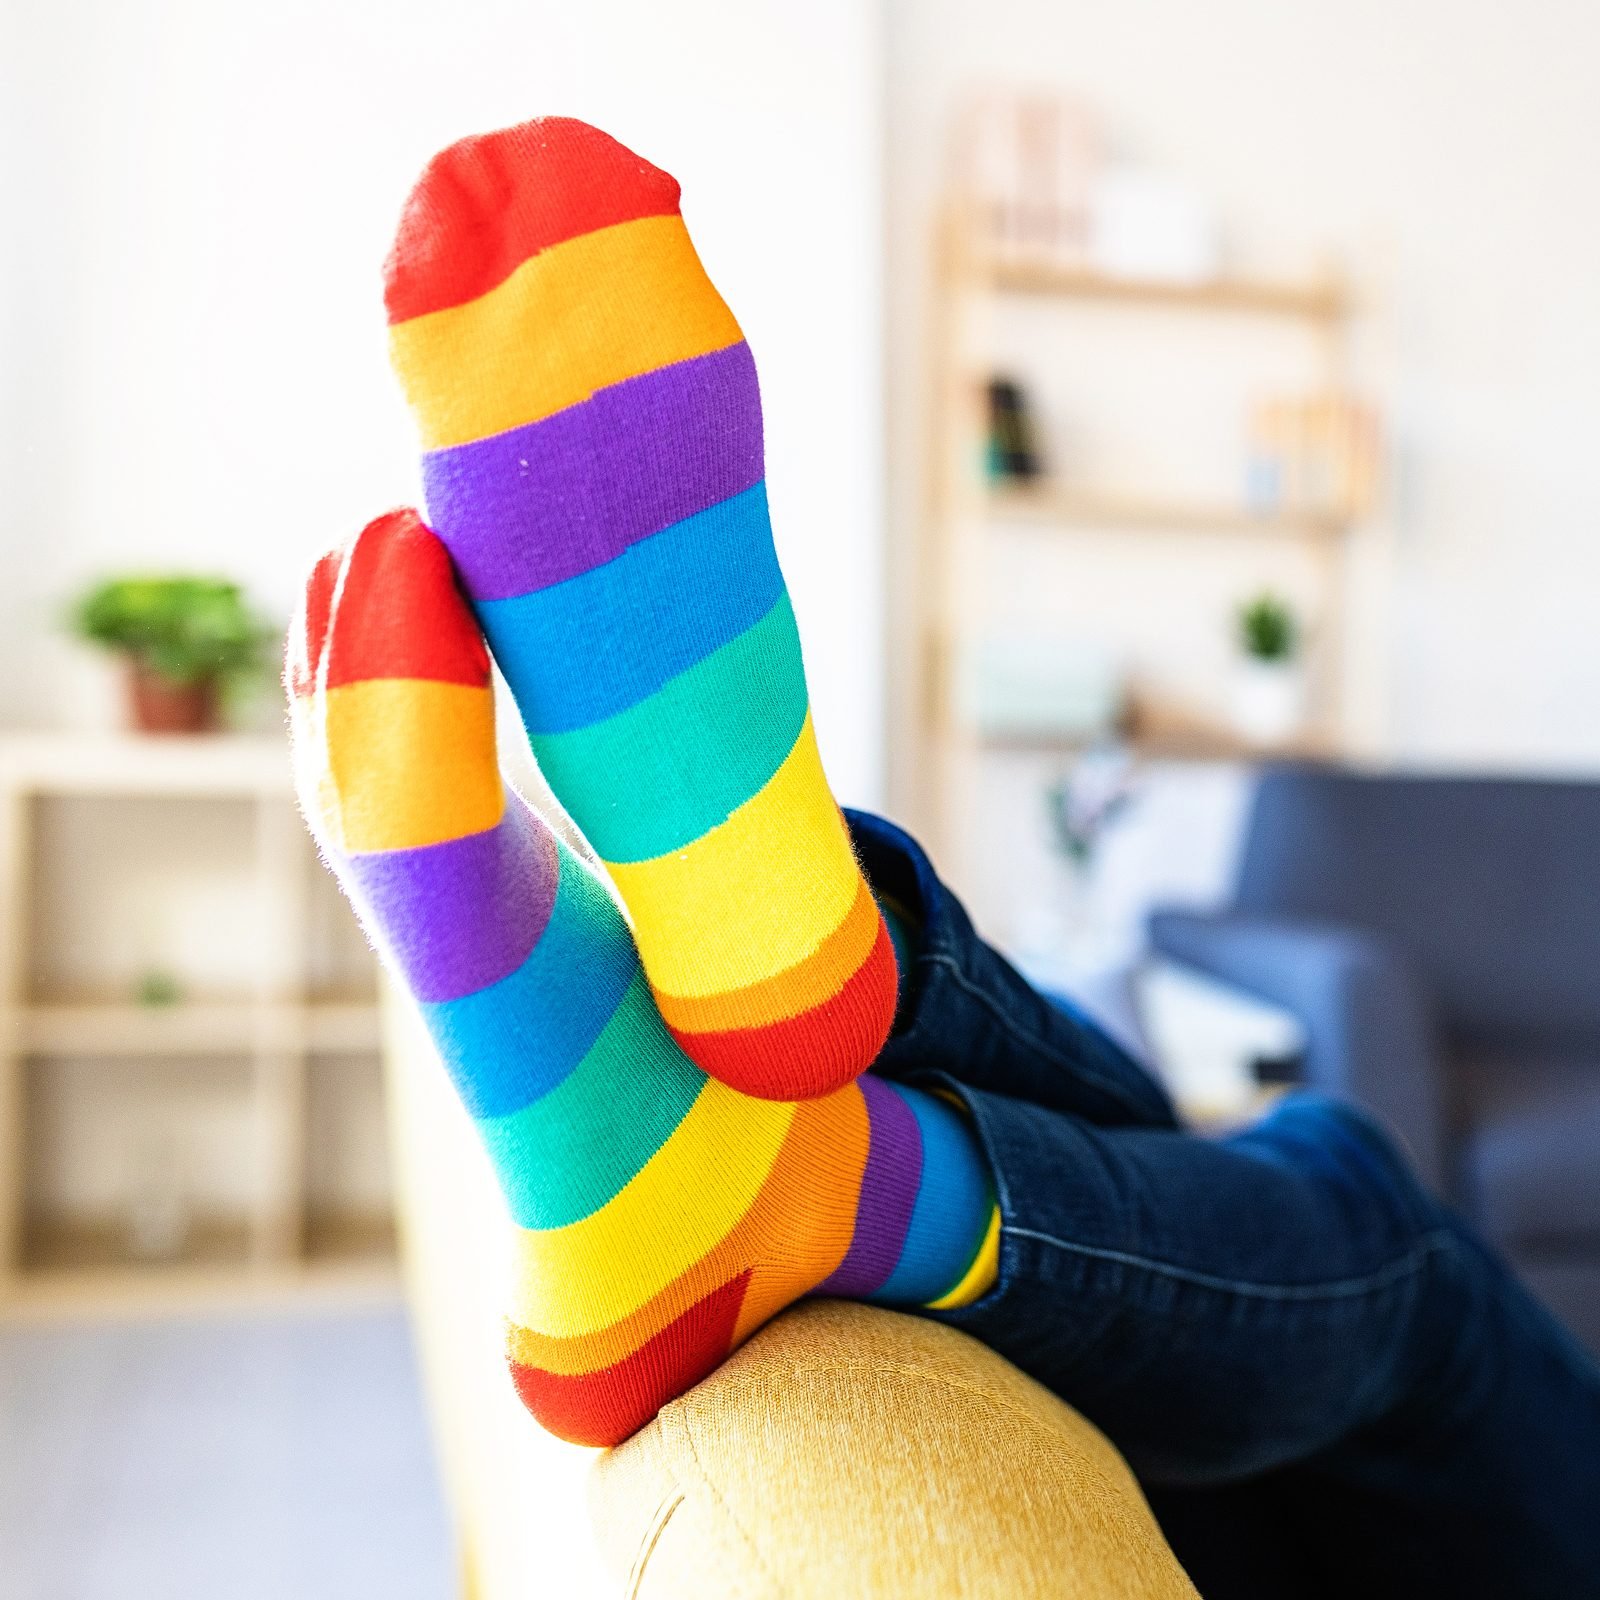 https://www.thehealthy.com/wp-content/uploads/2023/06/what-happens-if-you-dont-change-your-socks-GettyImages-1363584226-Pride-Month-Socks-JVcrop.jpg?fit=700,700